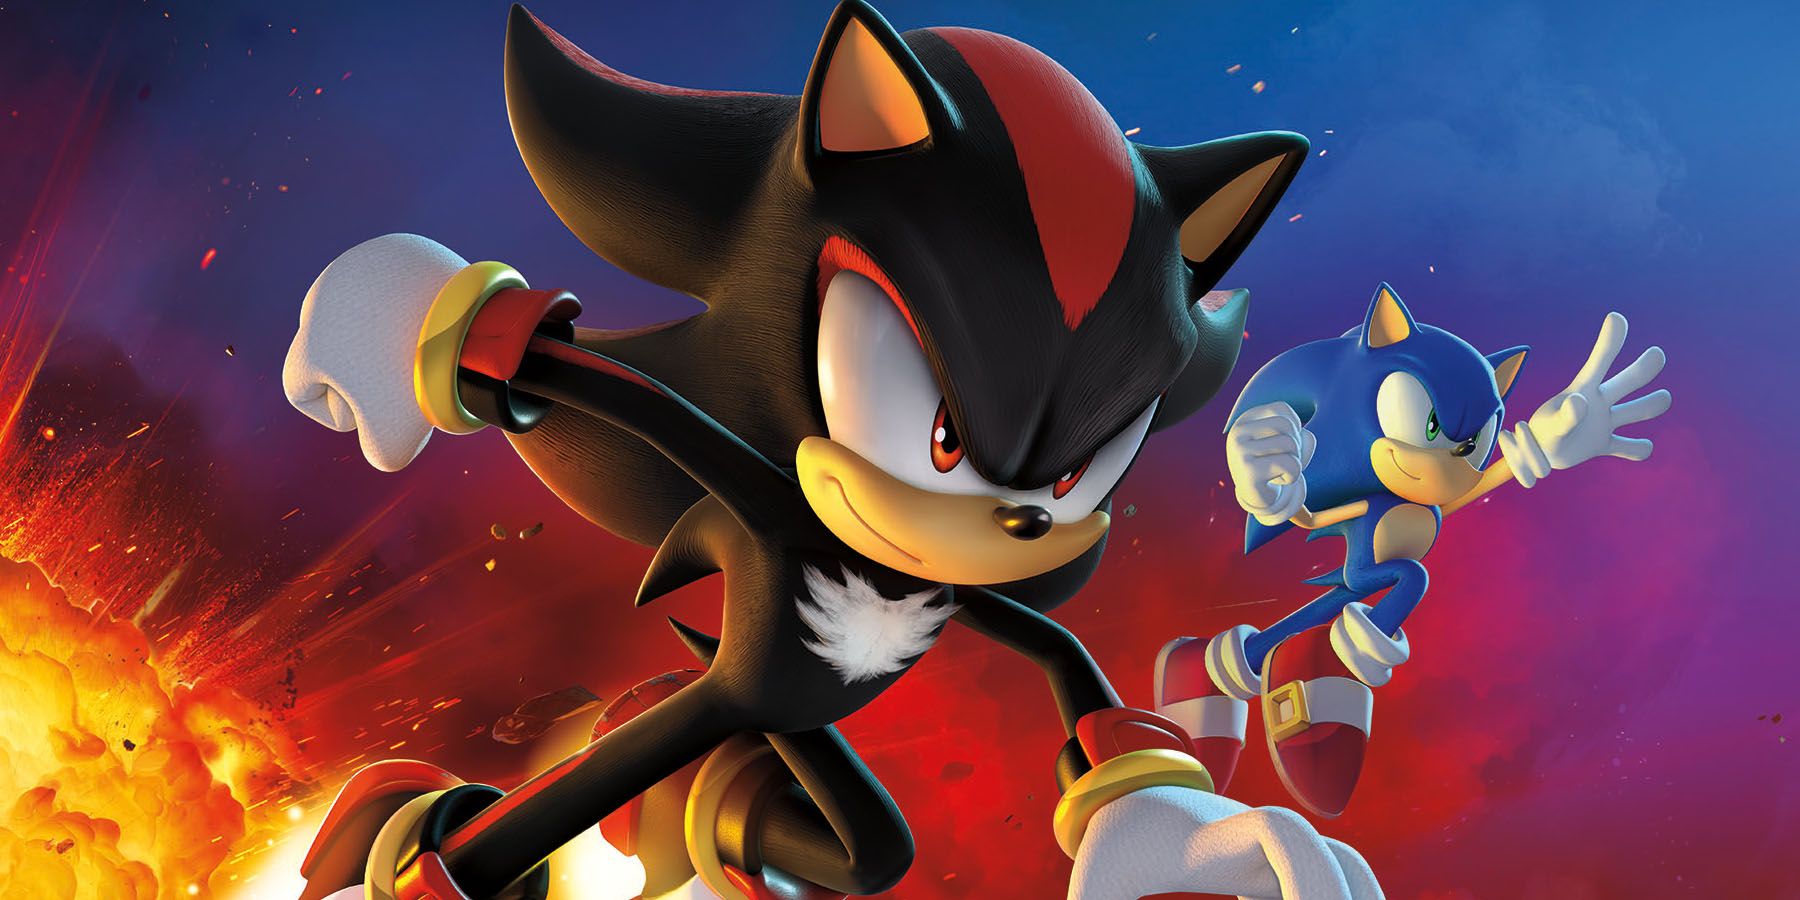 A promotional image of Sonic and Shadow jumping past an explosion against a night sky.